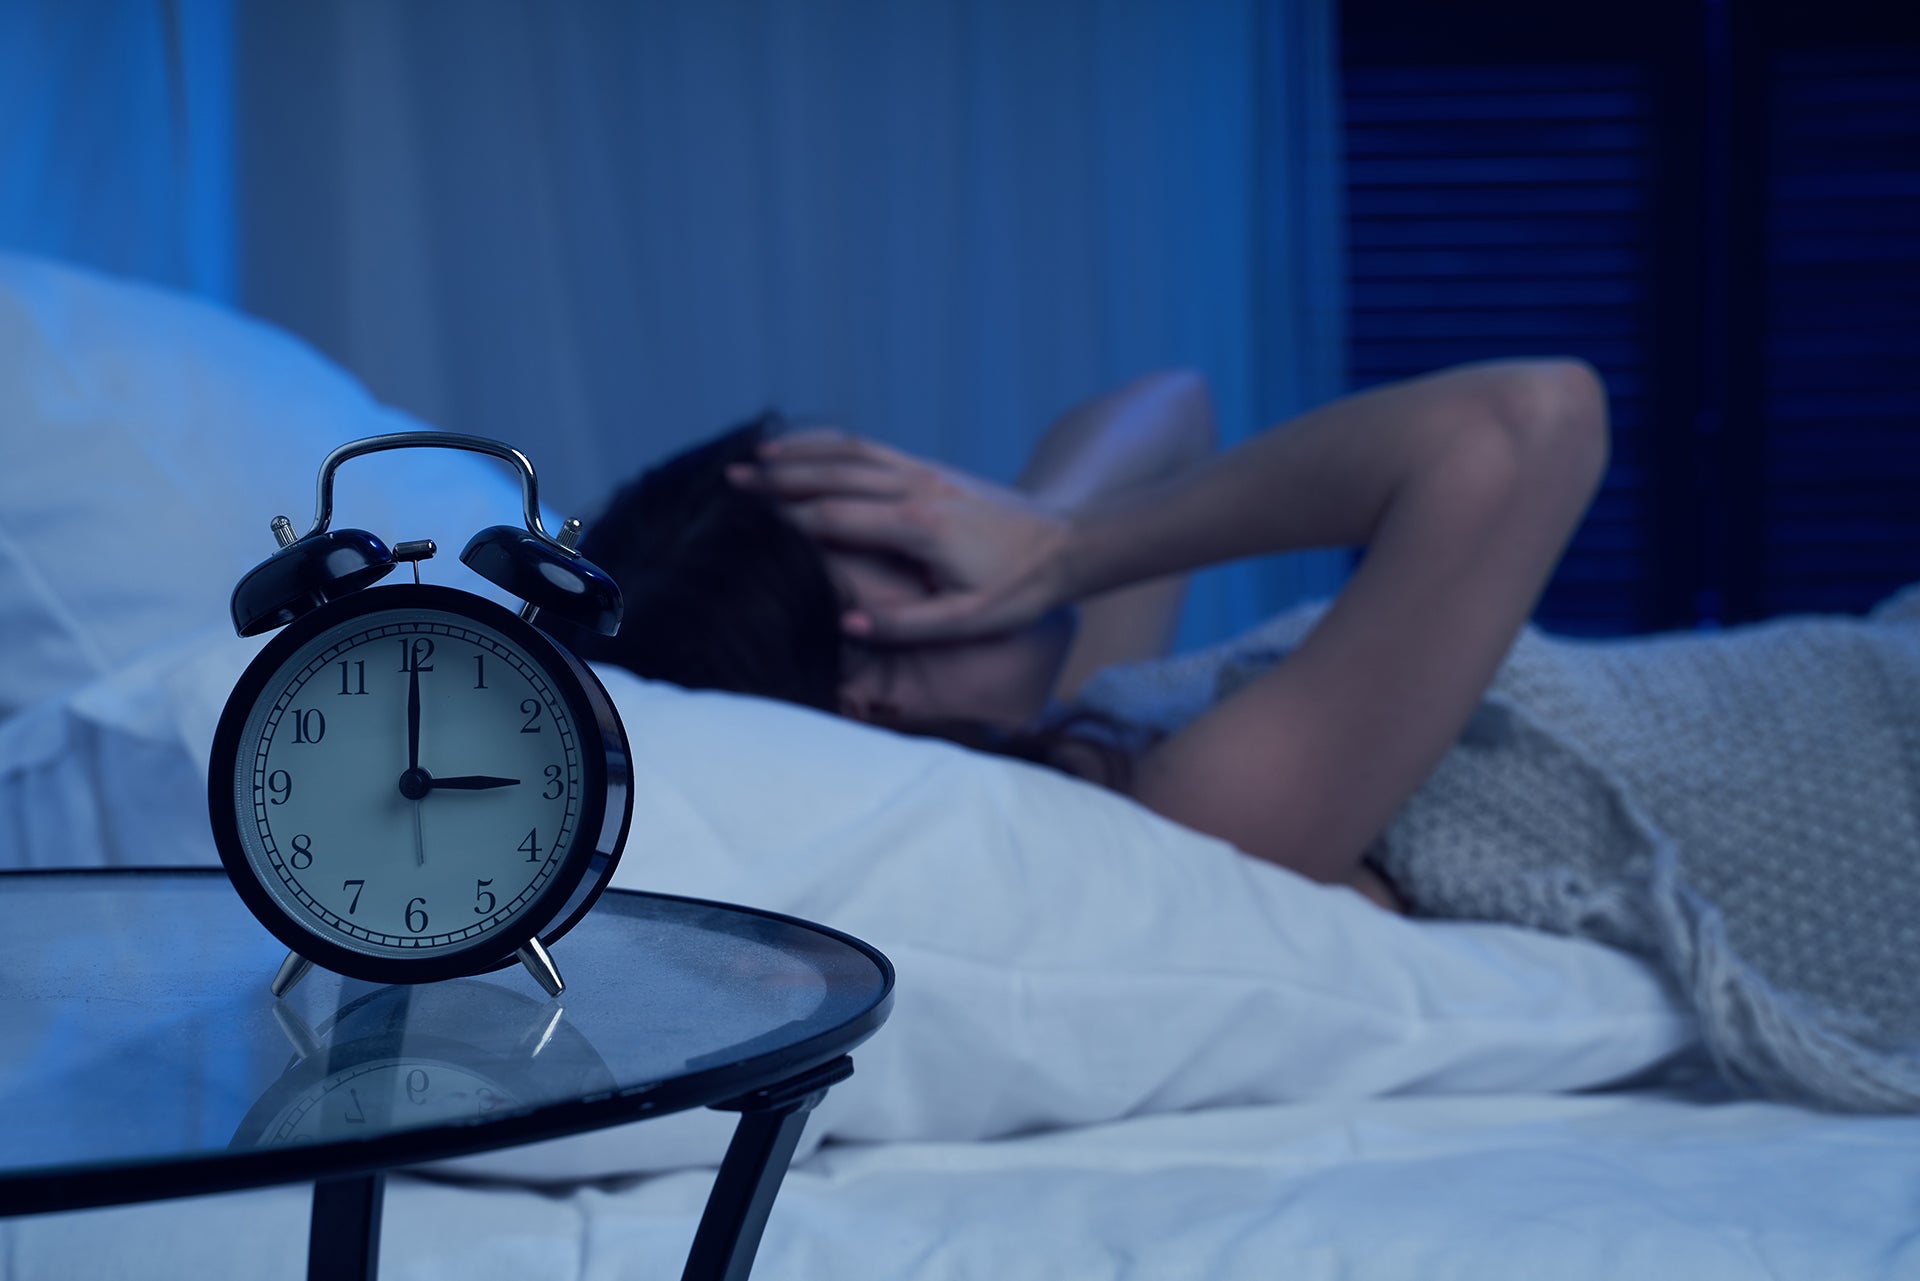 What causes insomnia? A look into sleep cycle & neurotransmitters